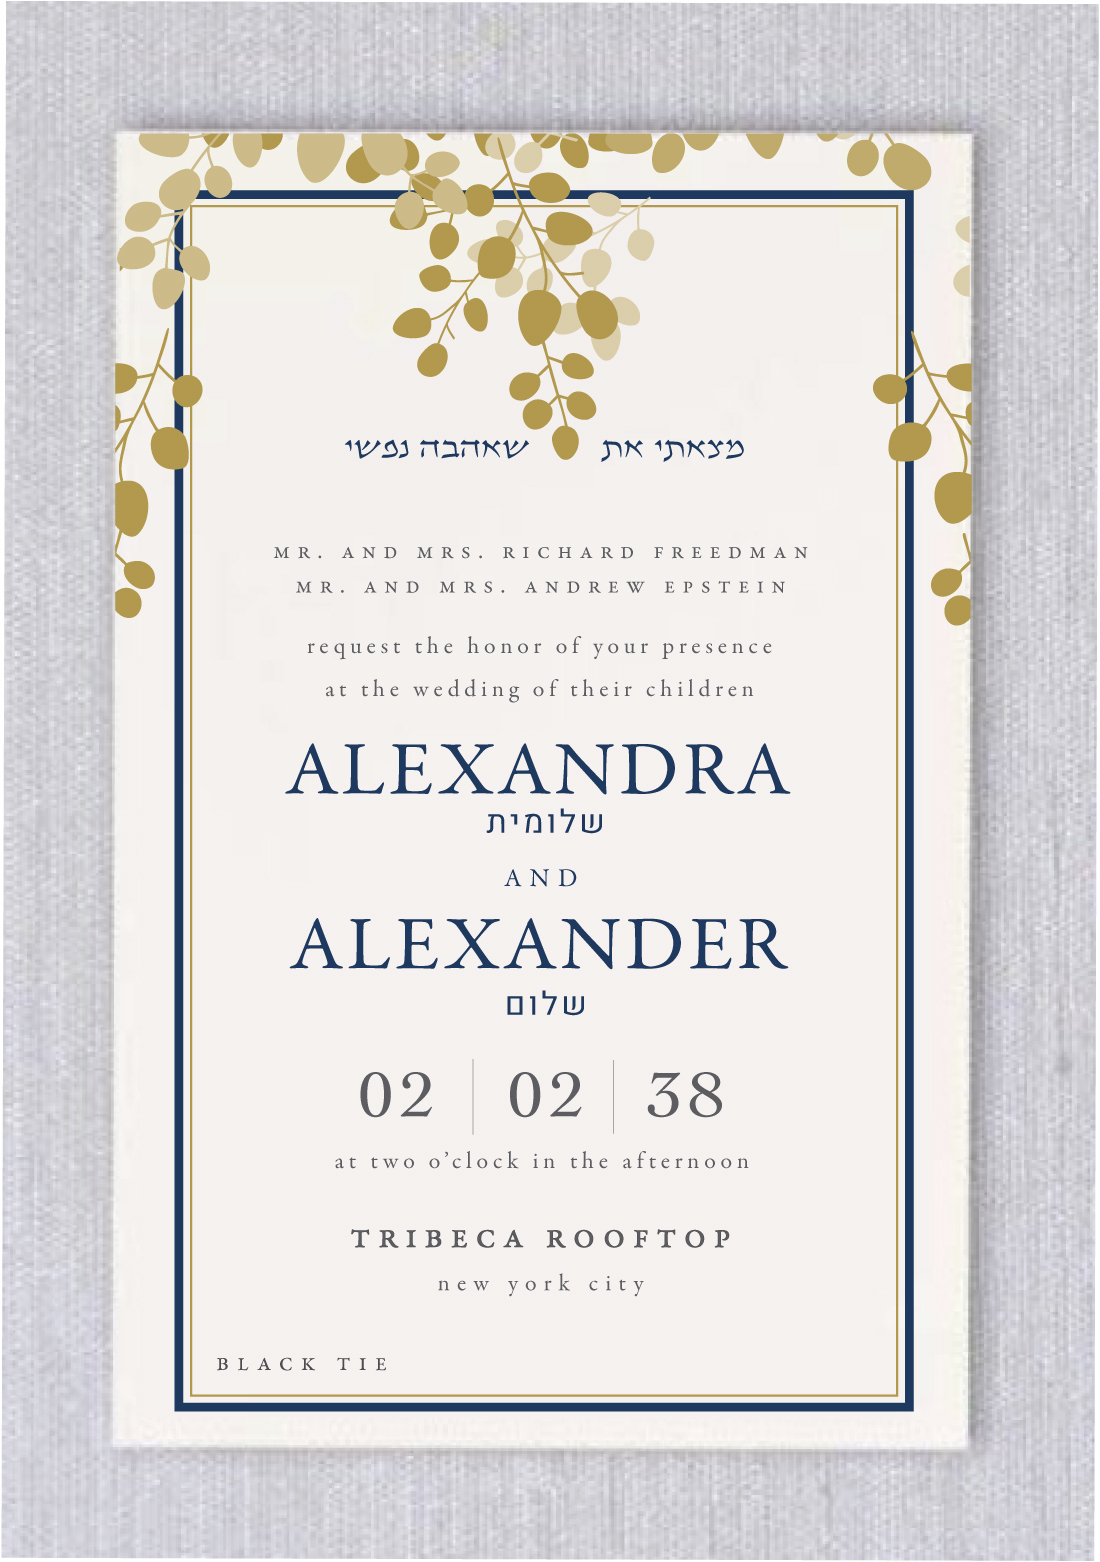 Floating Golden leaf Jewish Wedding Invitations that feature simple but elegant floating gold leaves surrounding your wedding details. Display your names in a fancy elegant type Guests will admire your elegant style.